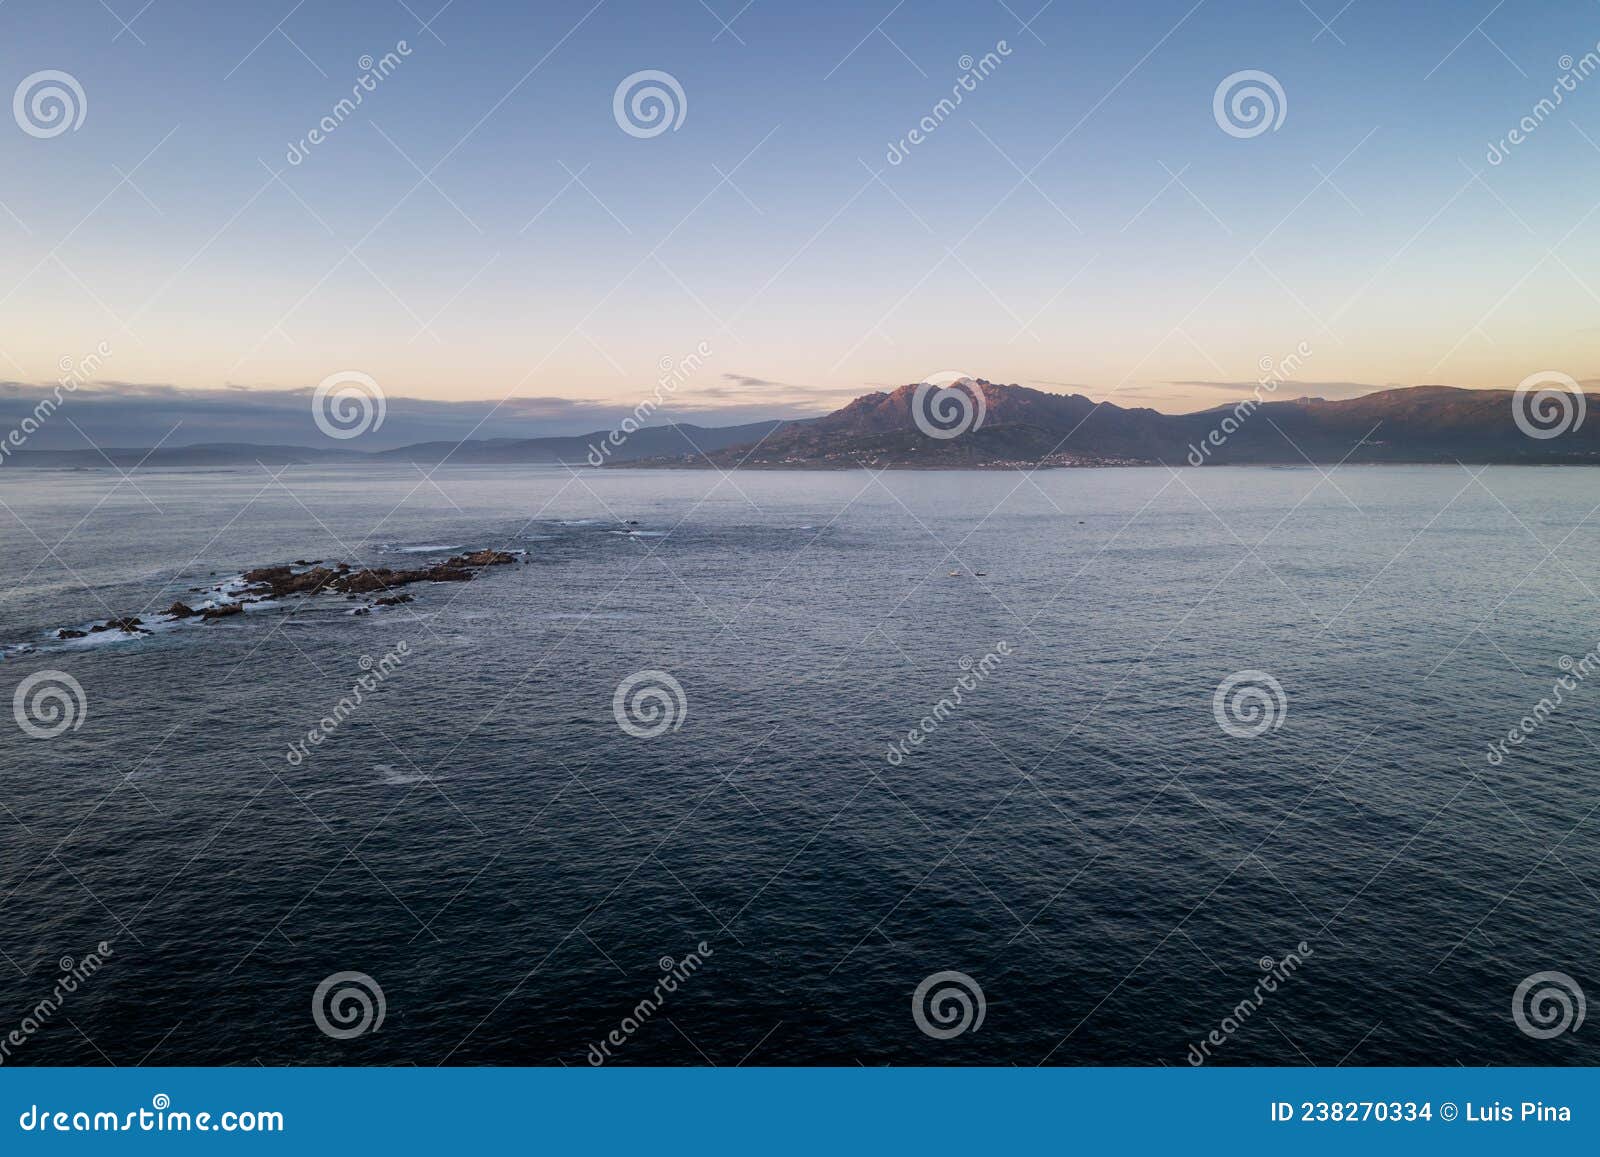 amazing drone aerial landscape view of mountains in atlantic ocean with waves at sunset in caldebarcos in galiza, spain